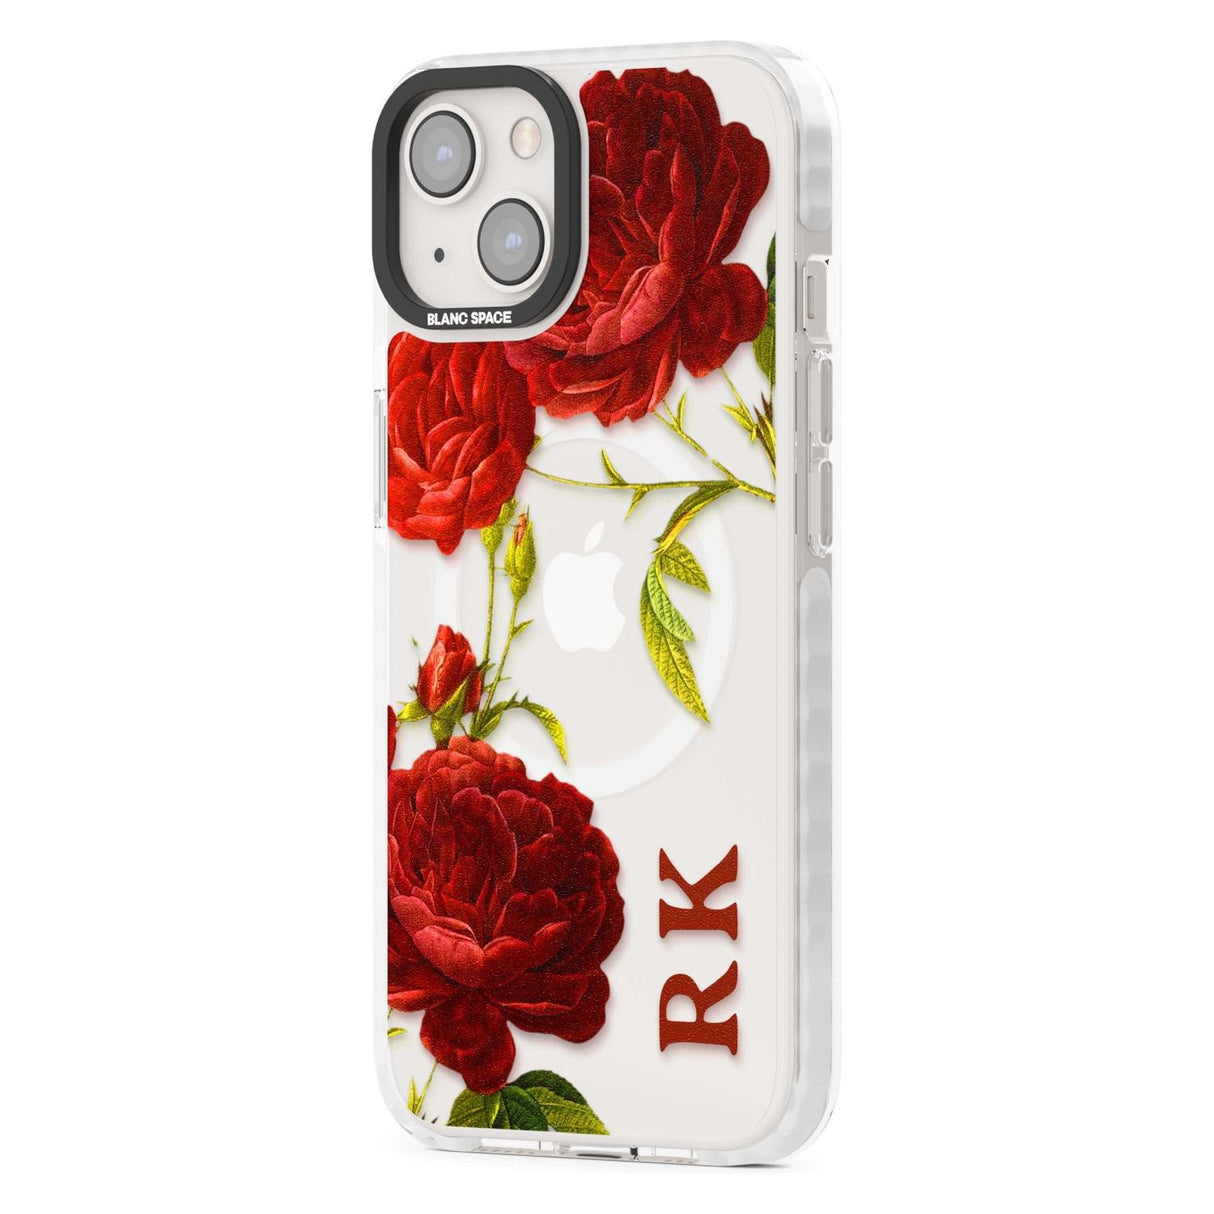 Personalised Clear Vintage Floral Red Roses Custom Phone Case iPhone 15 Pro Max / Black Impact Case,iPhone 15 Plus / Black Impact Case,iPhone 15 Pro / Black Impact Case,iPhone 15 / Black Impact Case,iPhone 15 Pro Max / Impact Case,iPhone 15 Plus / Impact Case,iPhone 15 Pro / Impact Case,iPhone 15 / Impact Case,iPhone 15 Pro Max / Magsafe Black Impact Case,iPhone 15 Plus / Magsafe Black Impact Case,iPhone 15 Pro / Magsafe Black Impact Case,iPhone 15 / Magsafe Black Impact Case,iPhone 14 Pro Max / Black Impac